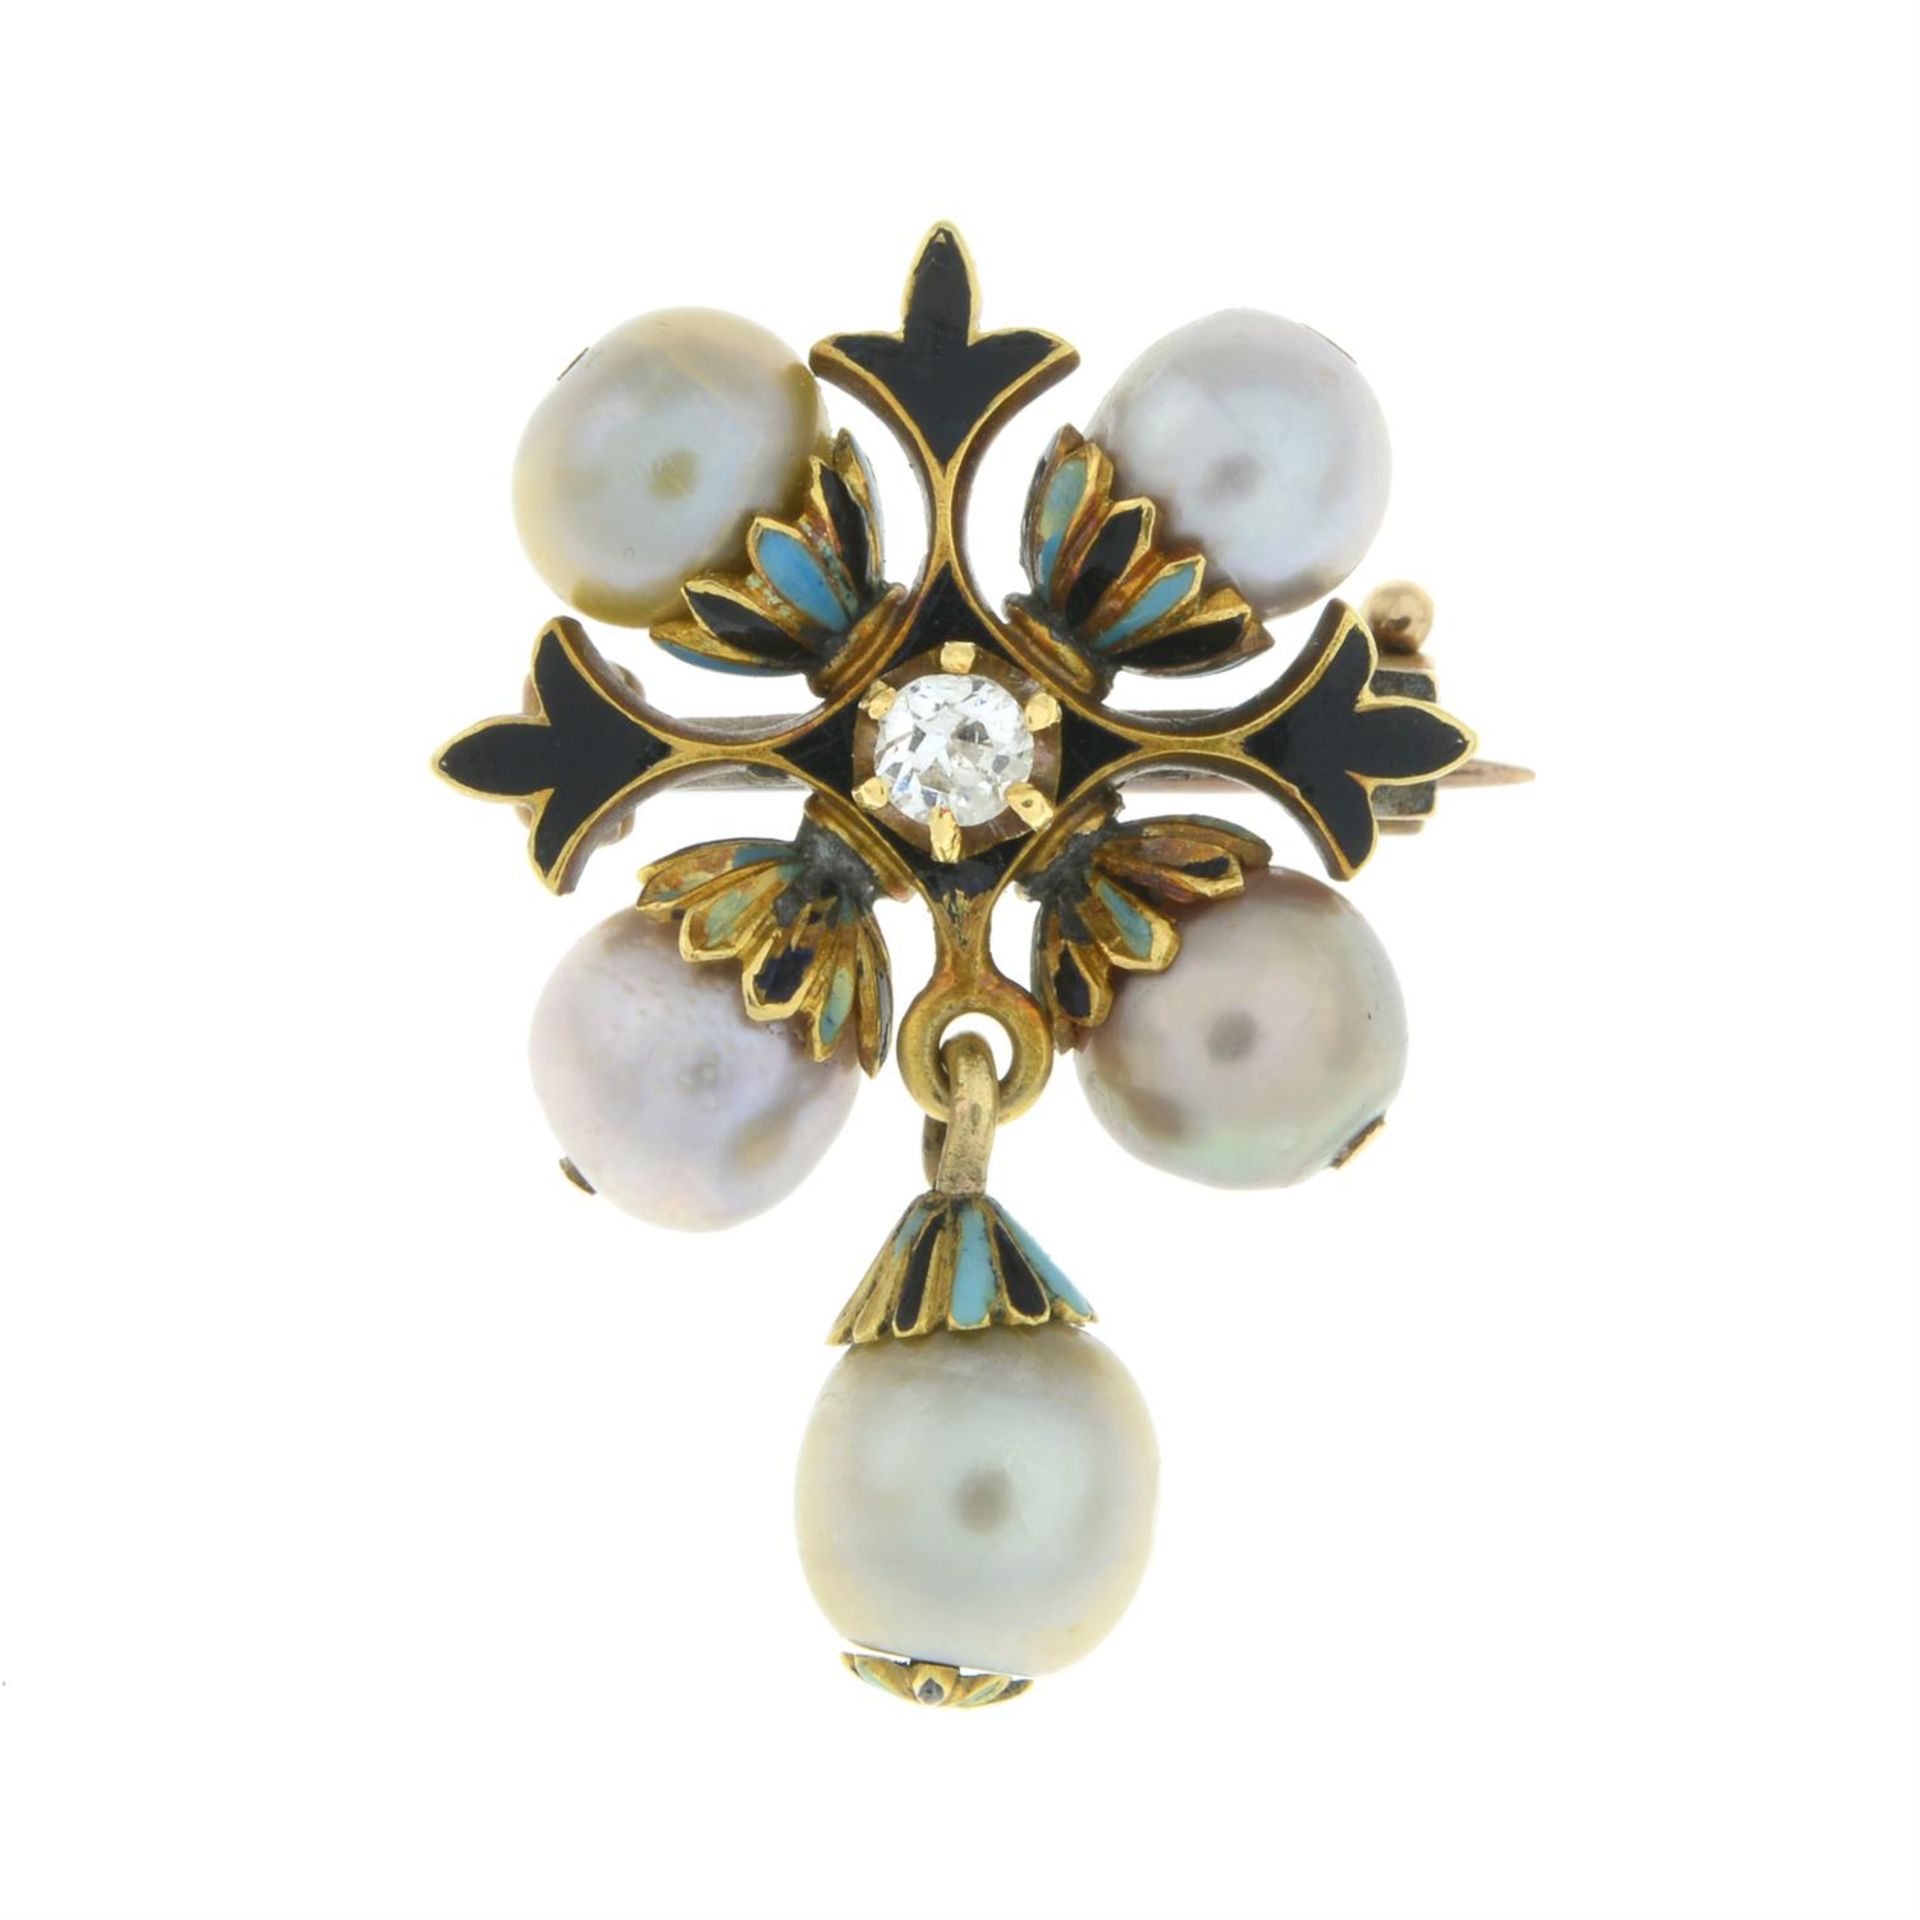 19th century gold diamond, pearl and enamel brooch - Image 2 of 4